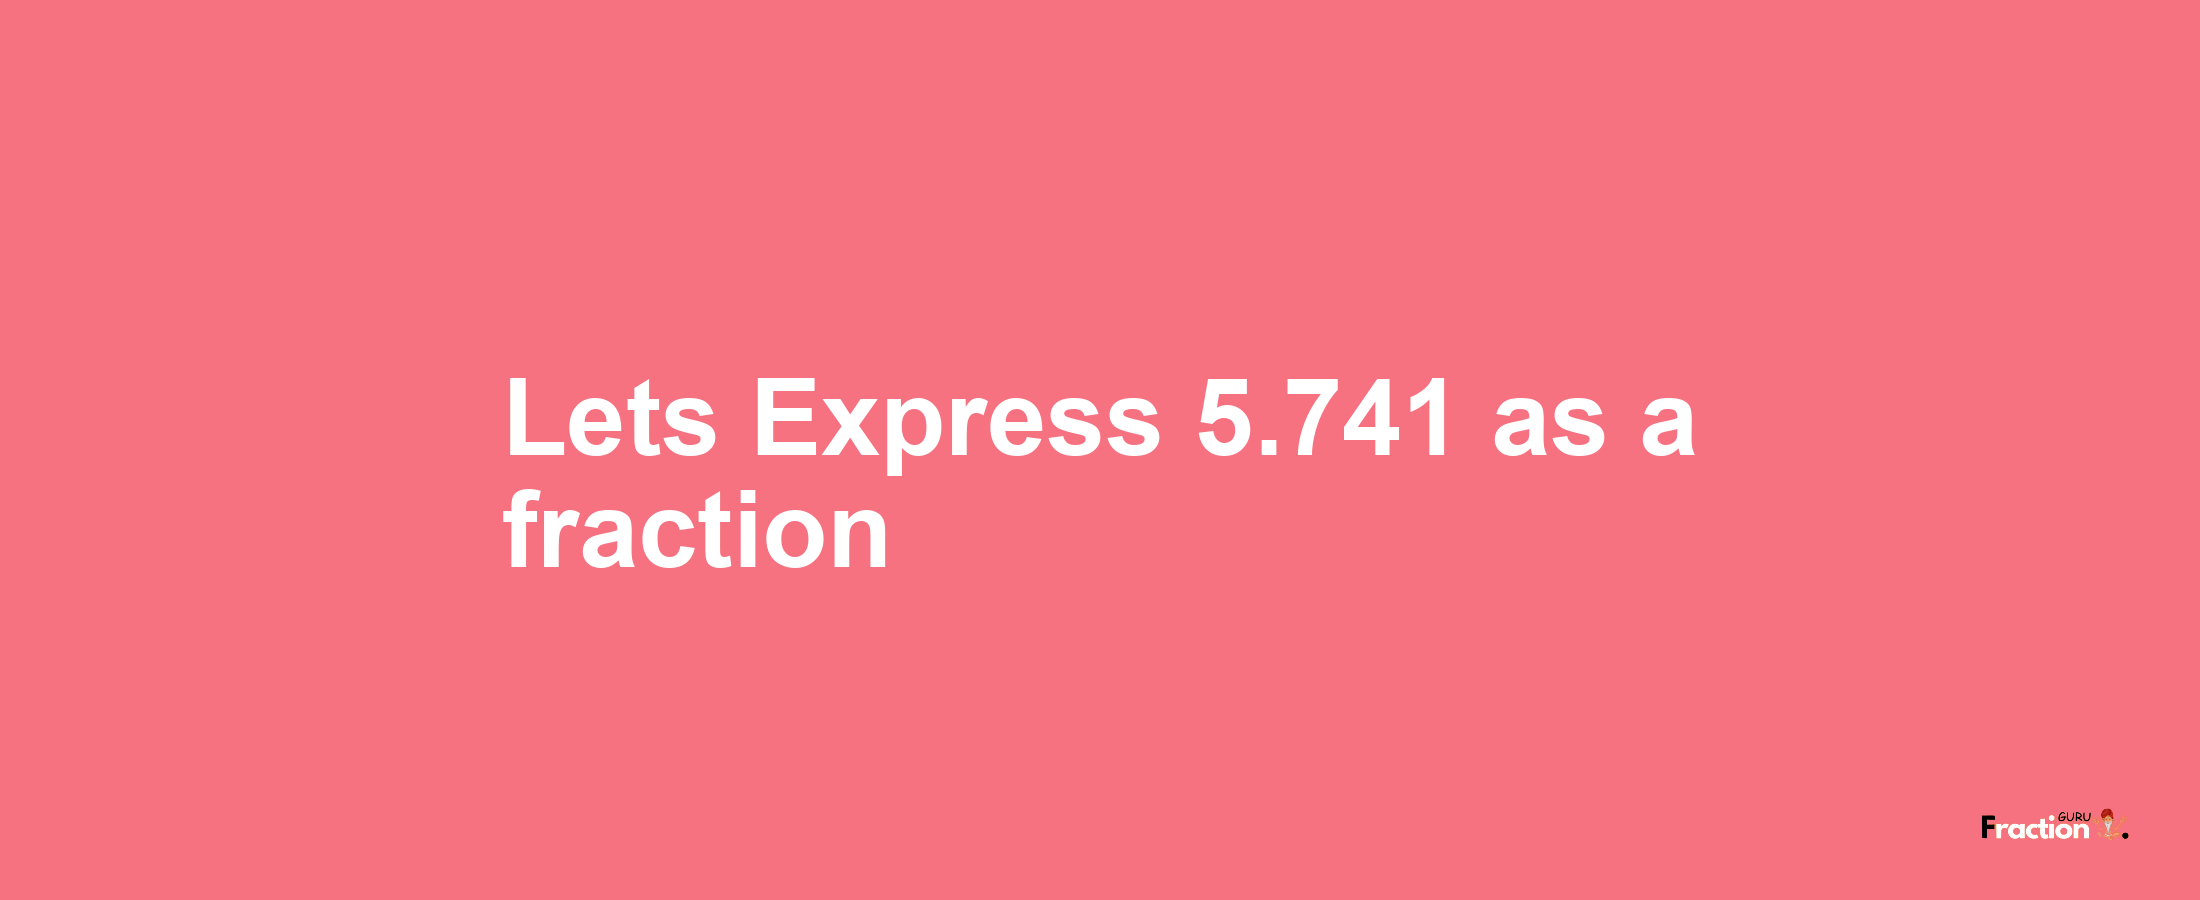 Lets Express 5.741 as afraction